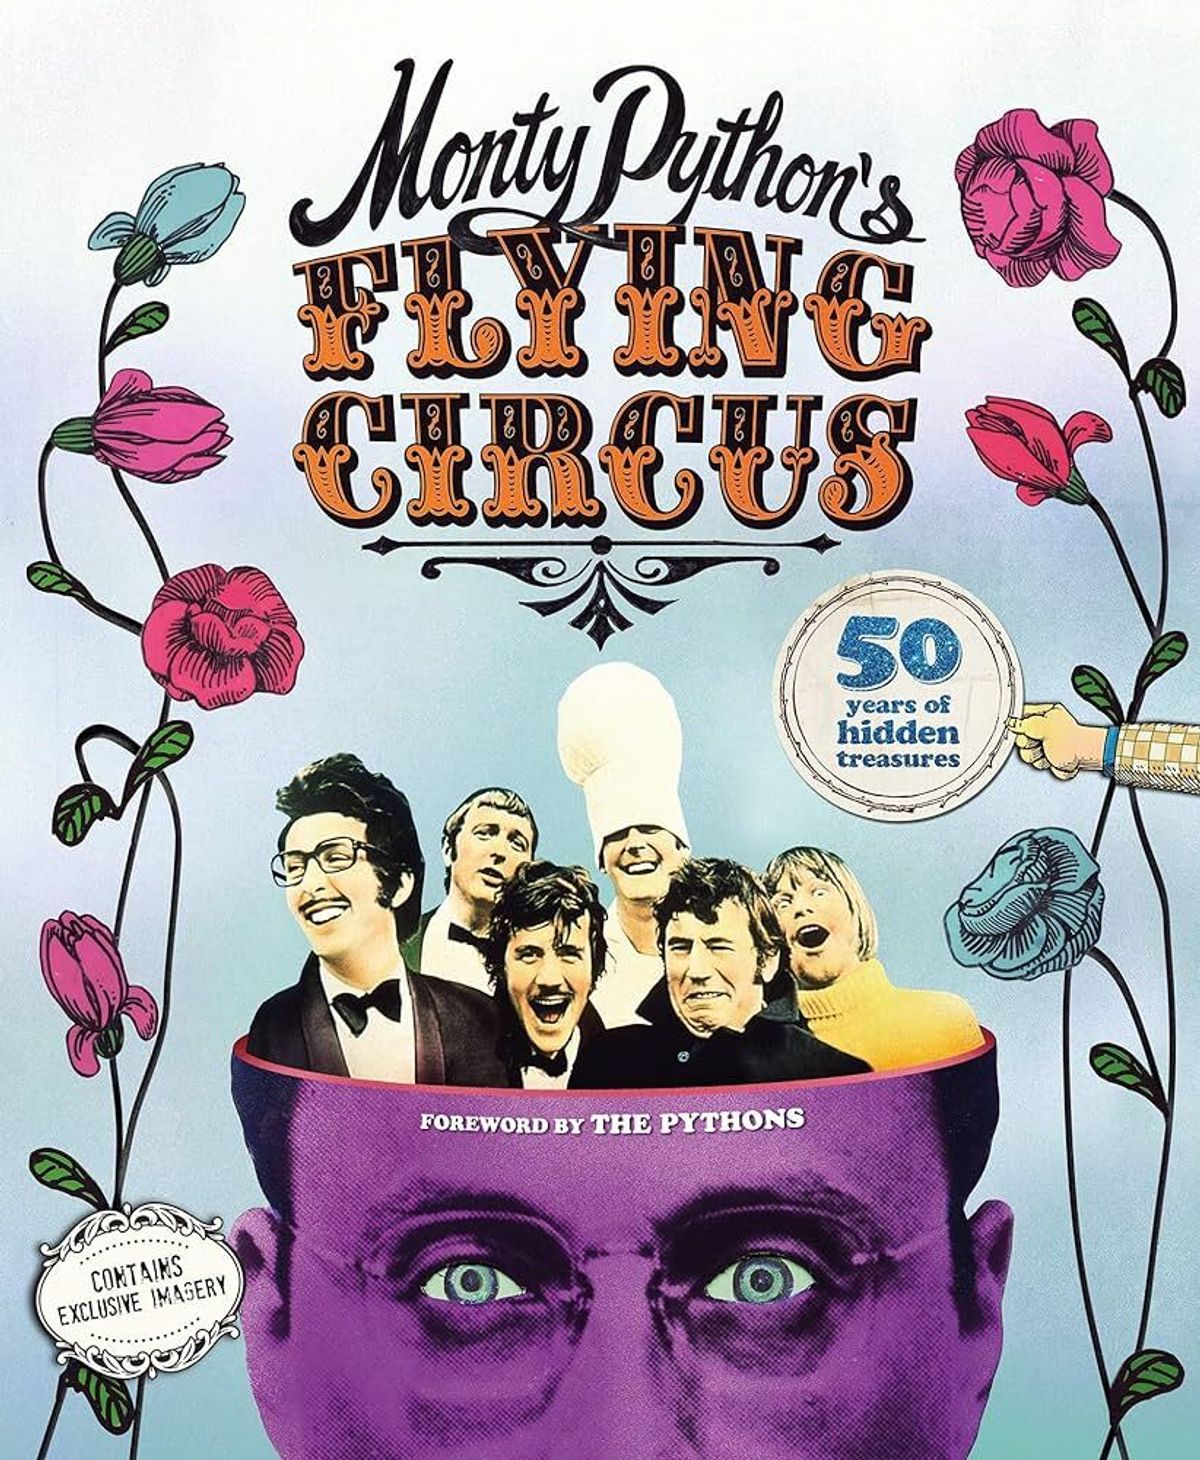 Monty Python's Flying Circus (Series) - TV Tropes